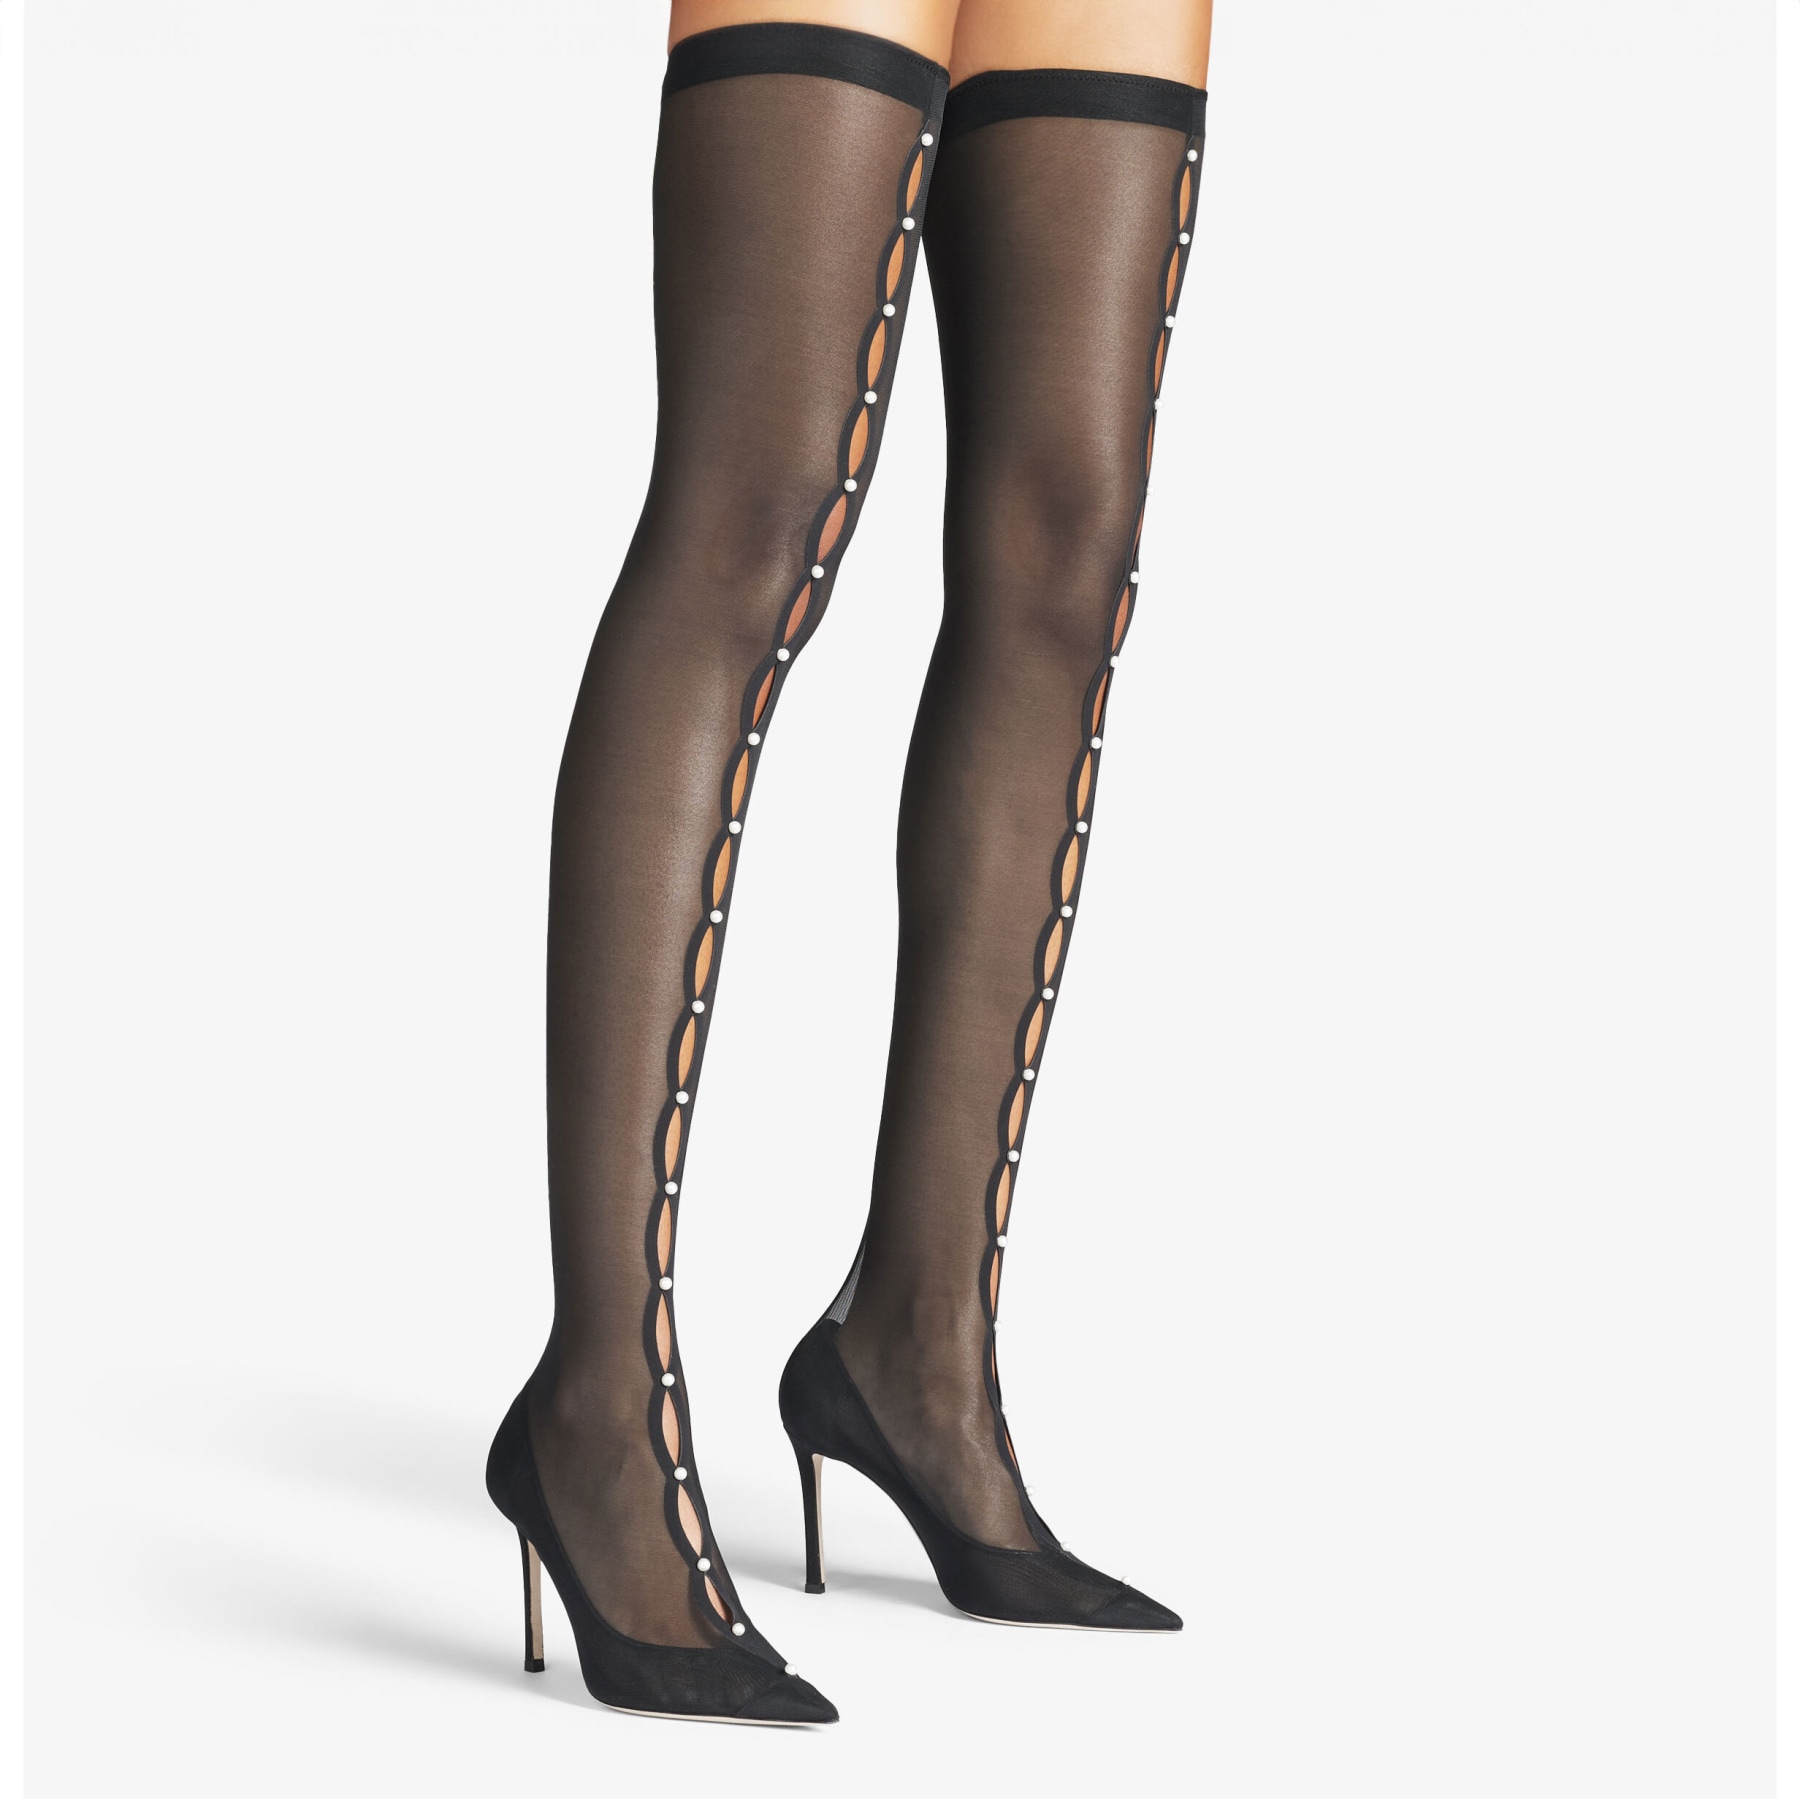 PSYCHE OTK 95 | Black Stretch Mesh Over-The-Knee Boots with Pearls 